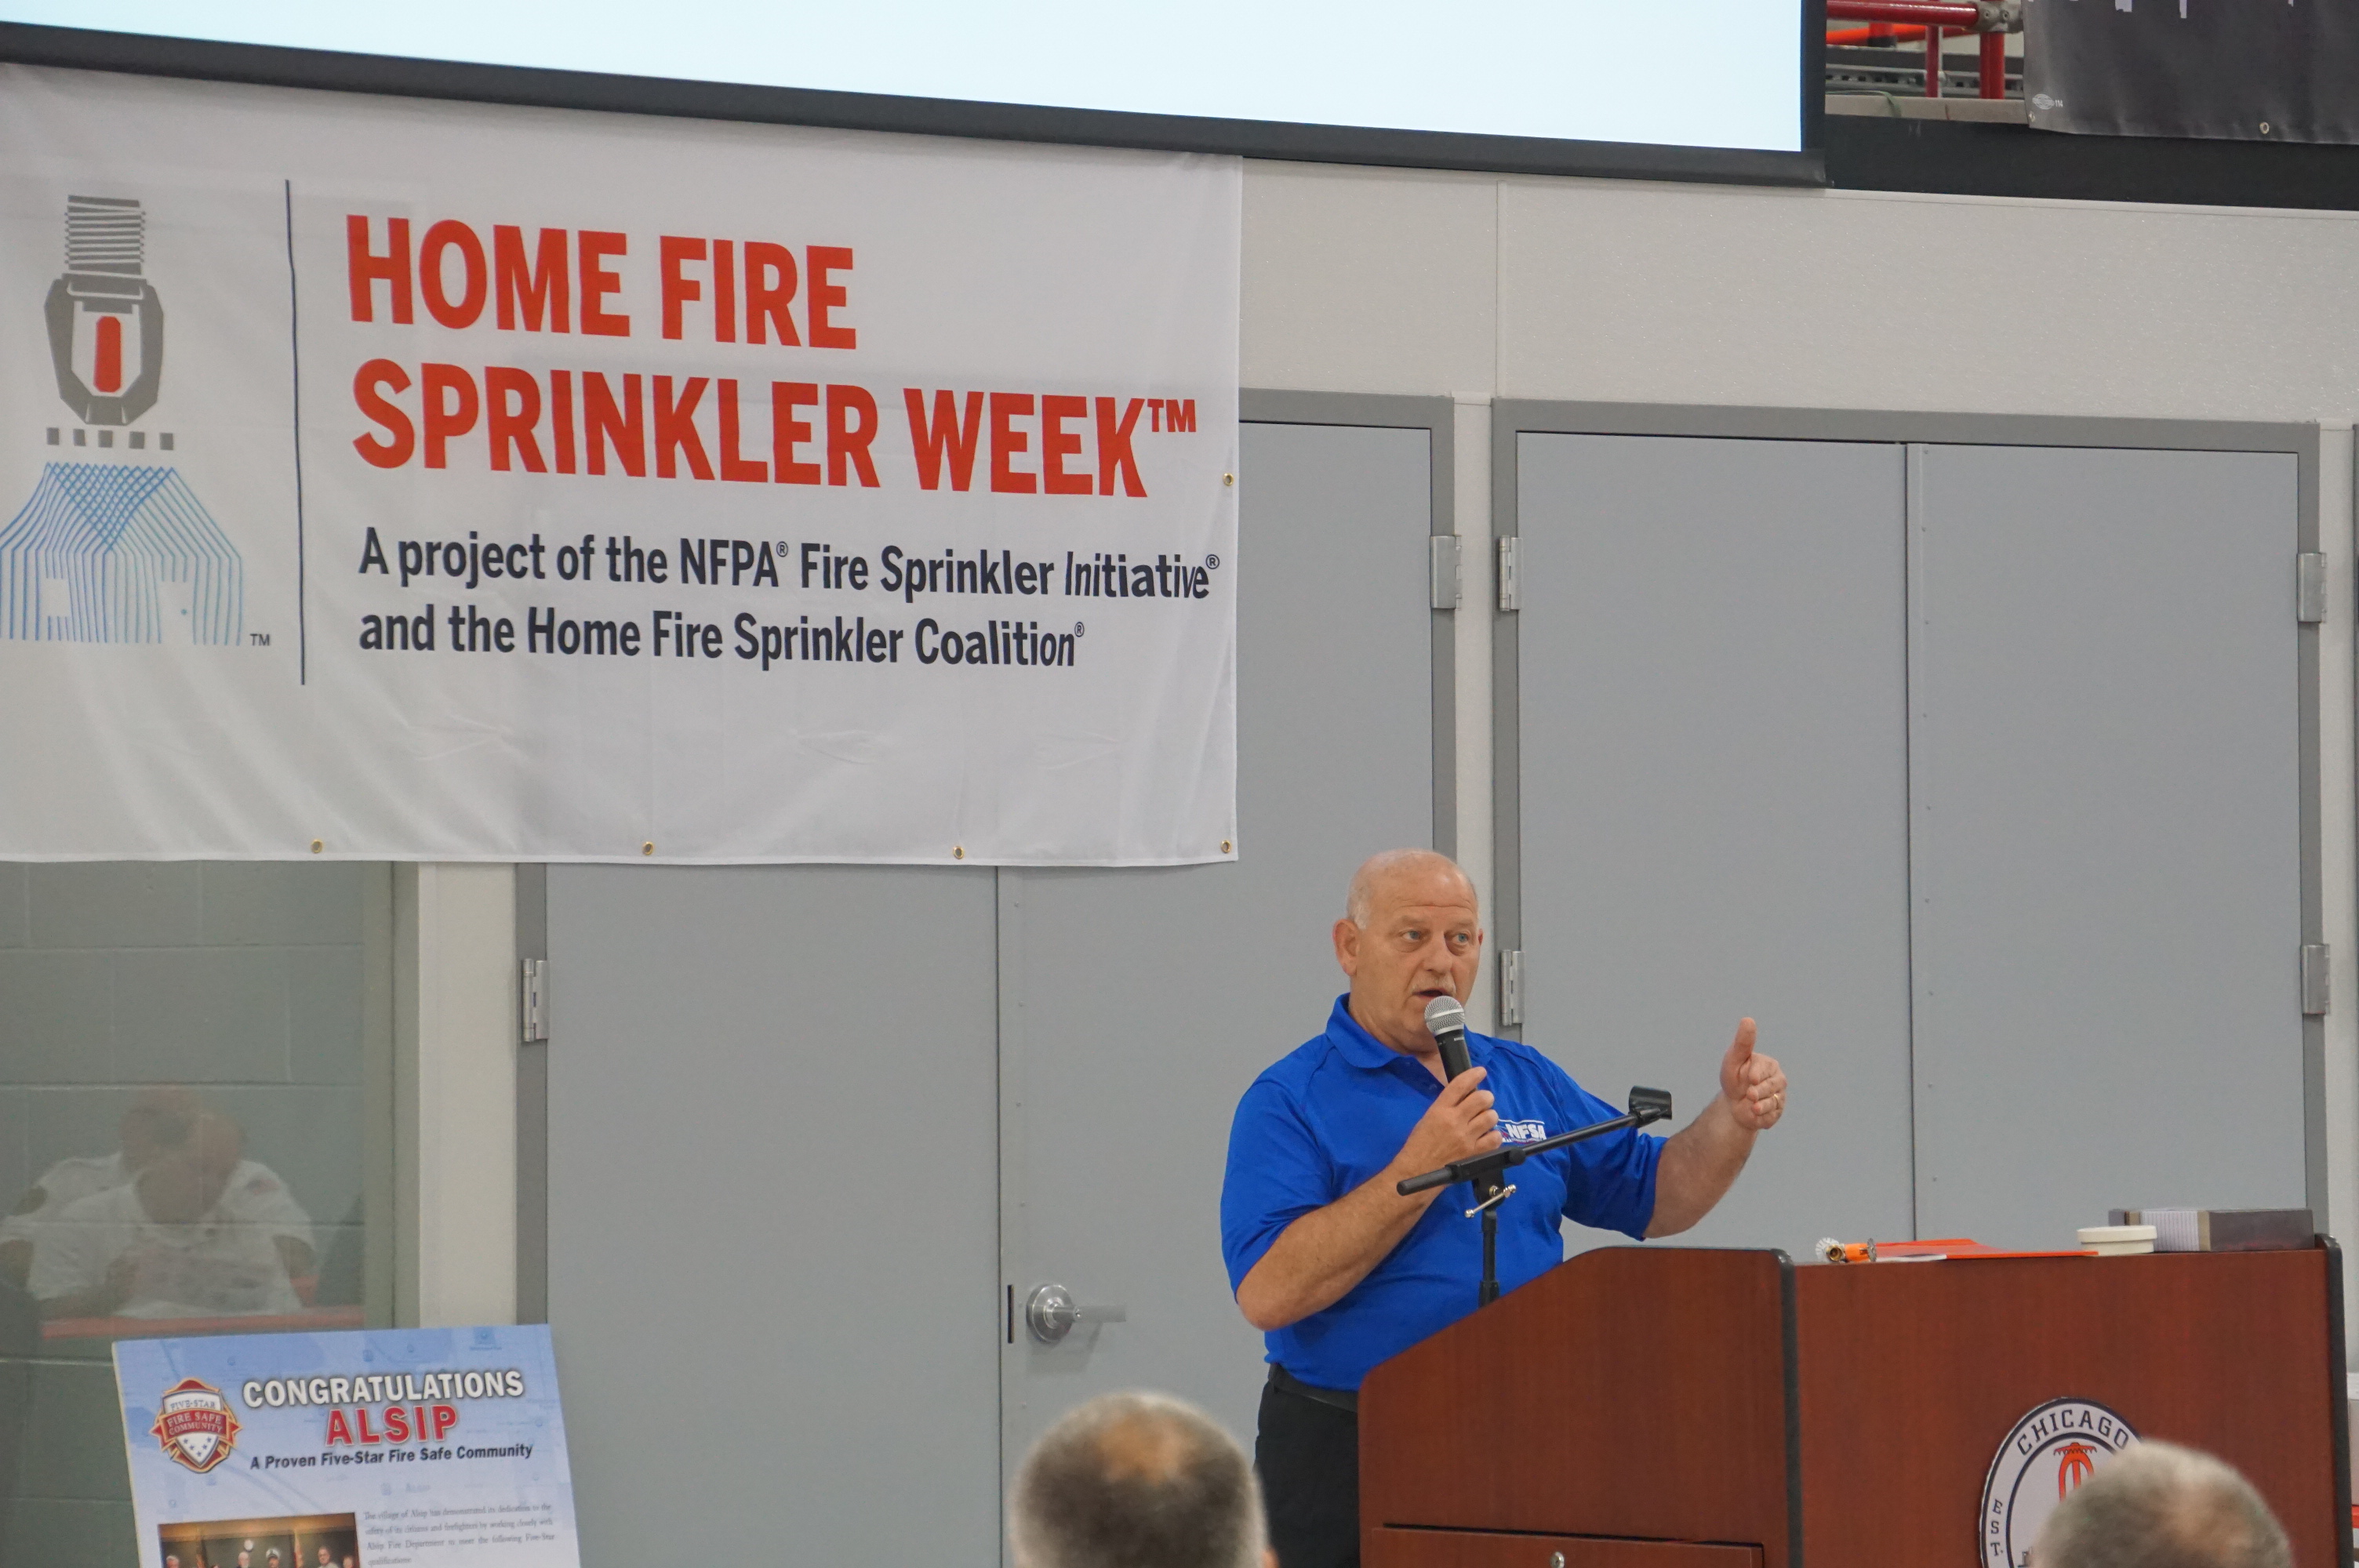 Bob Tinucci, Illinois Regional Manager with the National Fire Sprinkler Association – Illinois Chapter, read the recognition award for the Carol Stream Fire District.